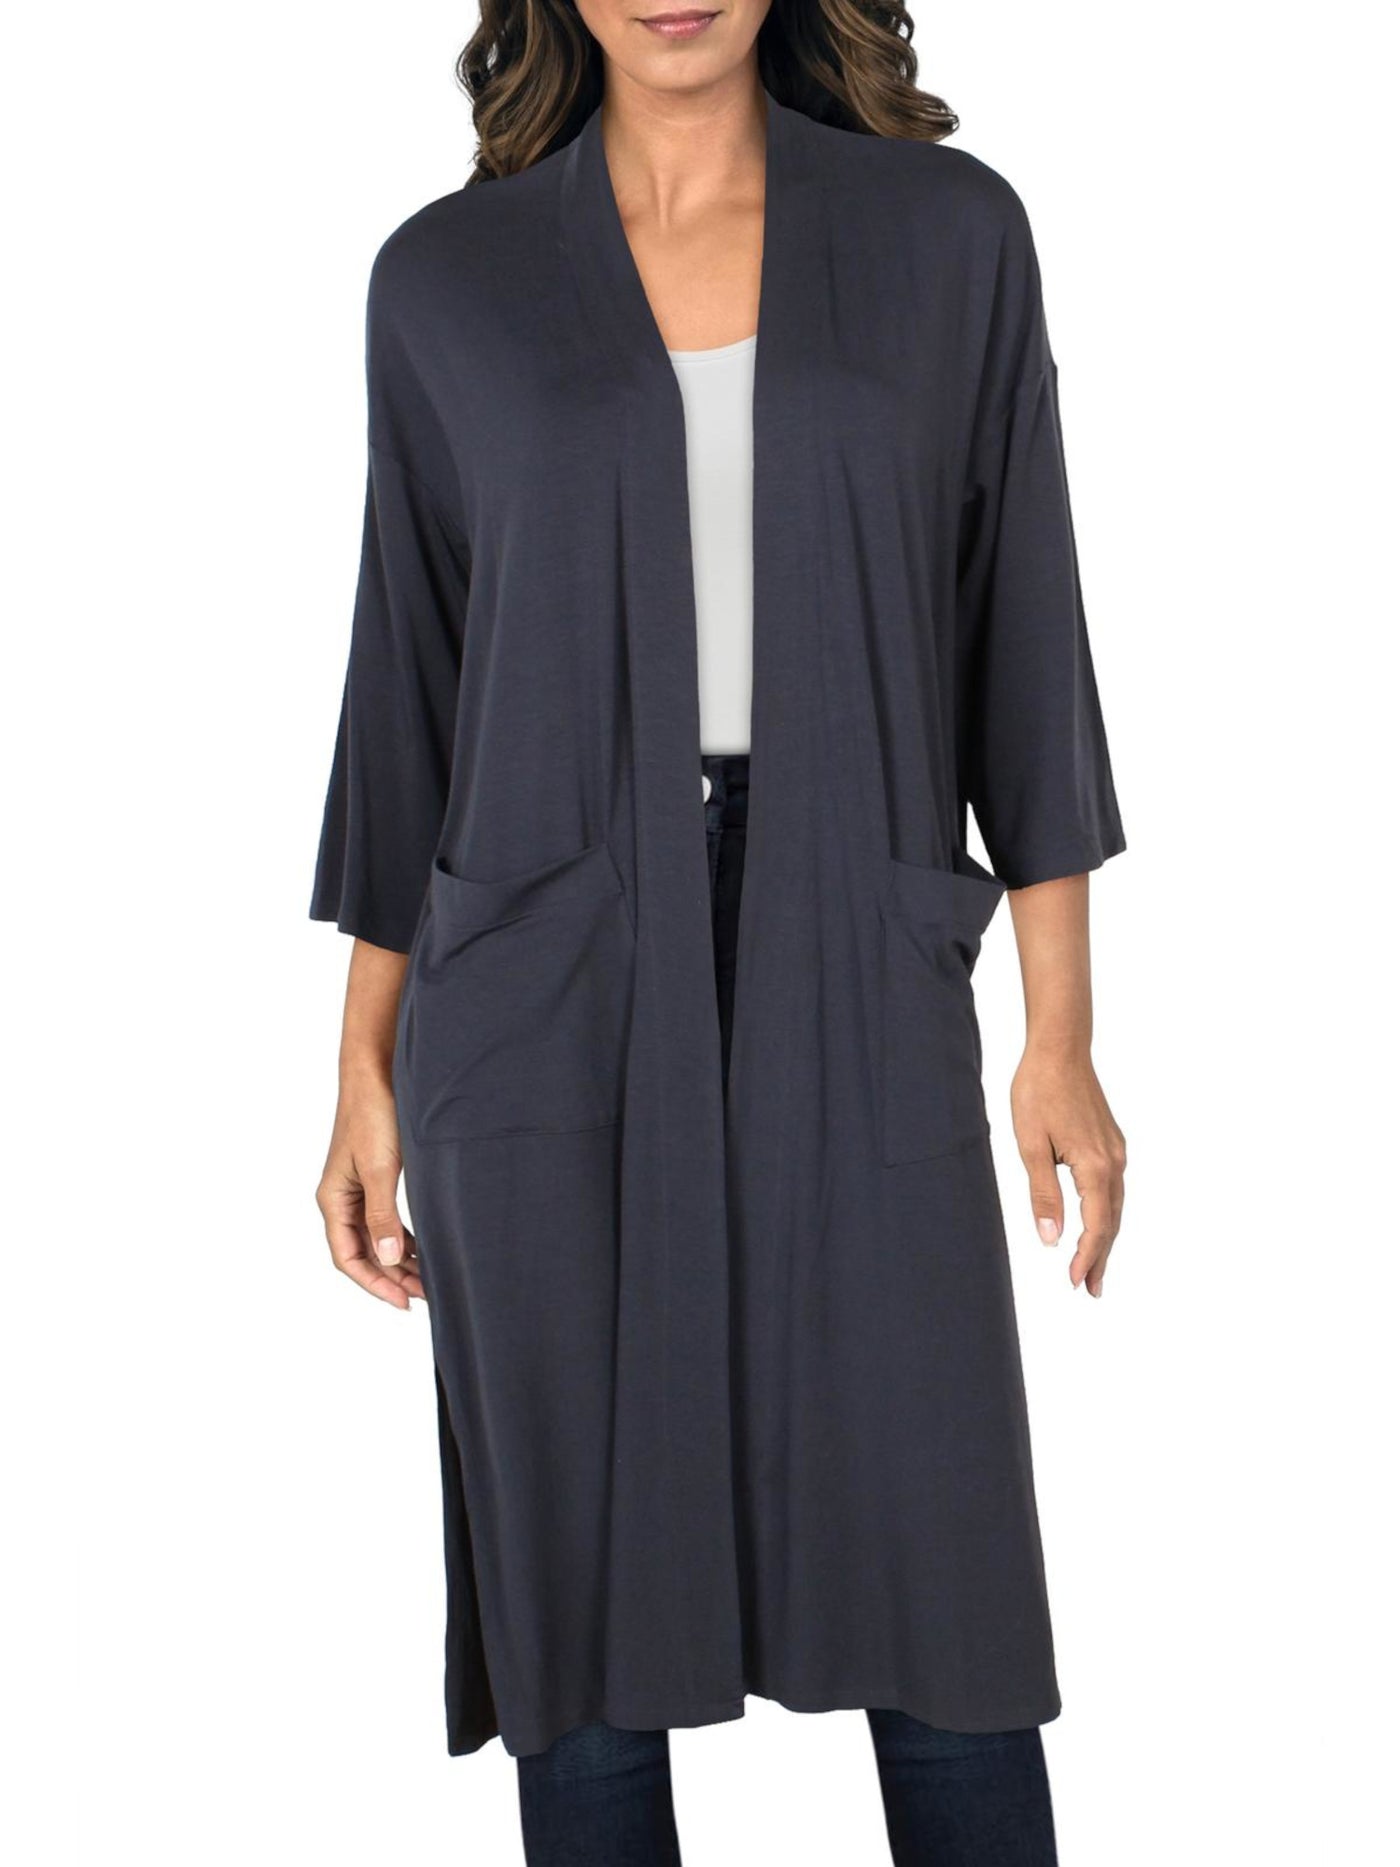 EILEEN FISHER Womens Navy Pocketed Side Slits Duster Elbow Sleeve Open Front Sweater XXS